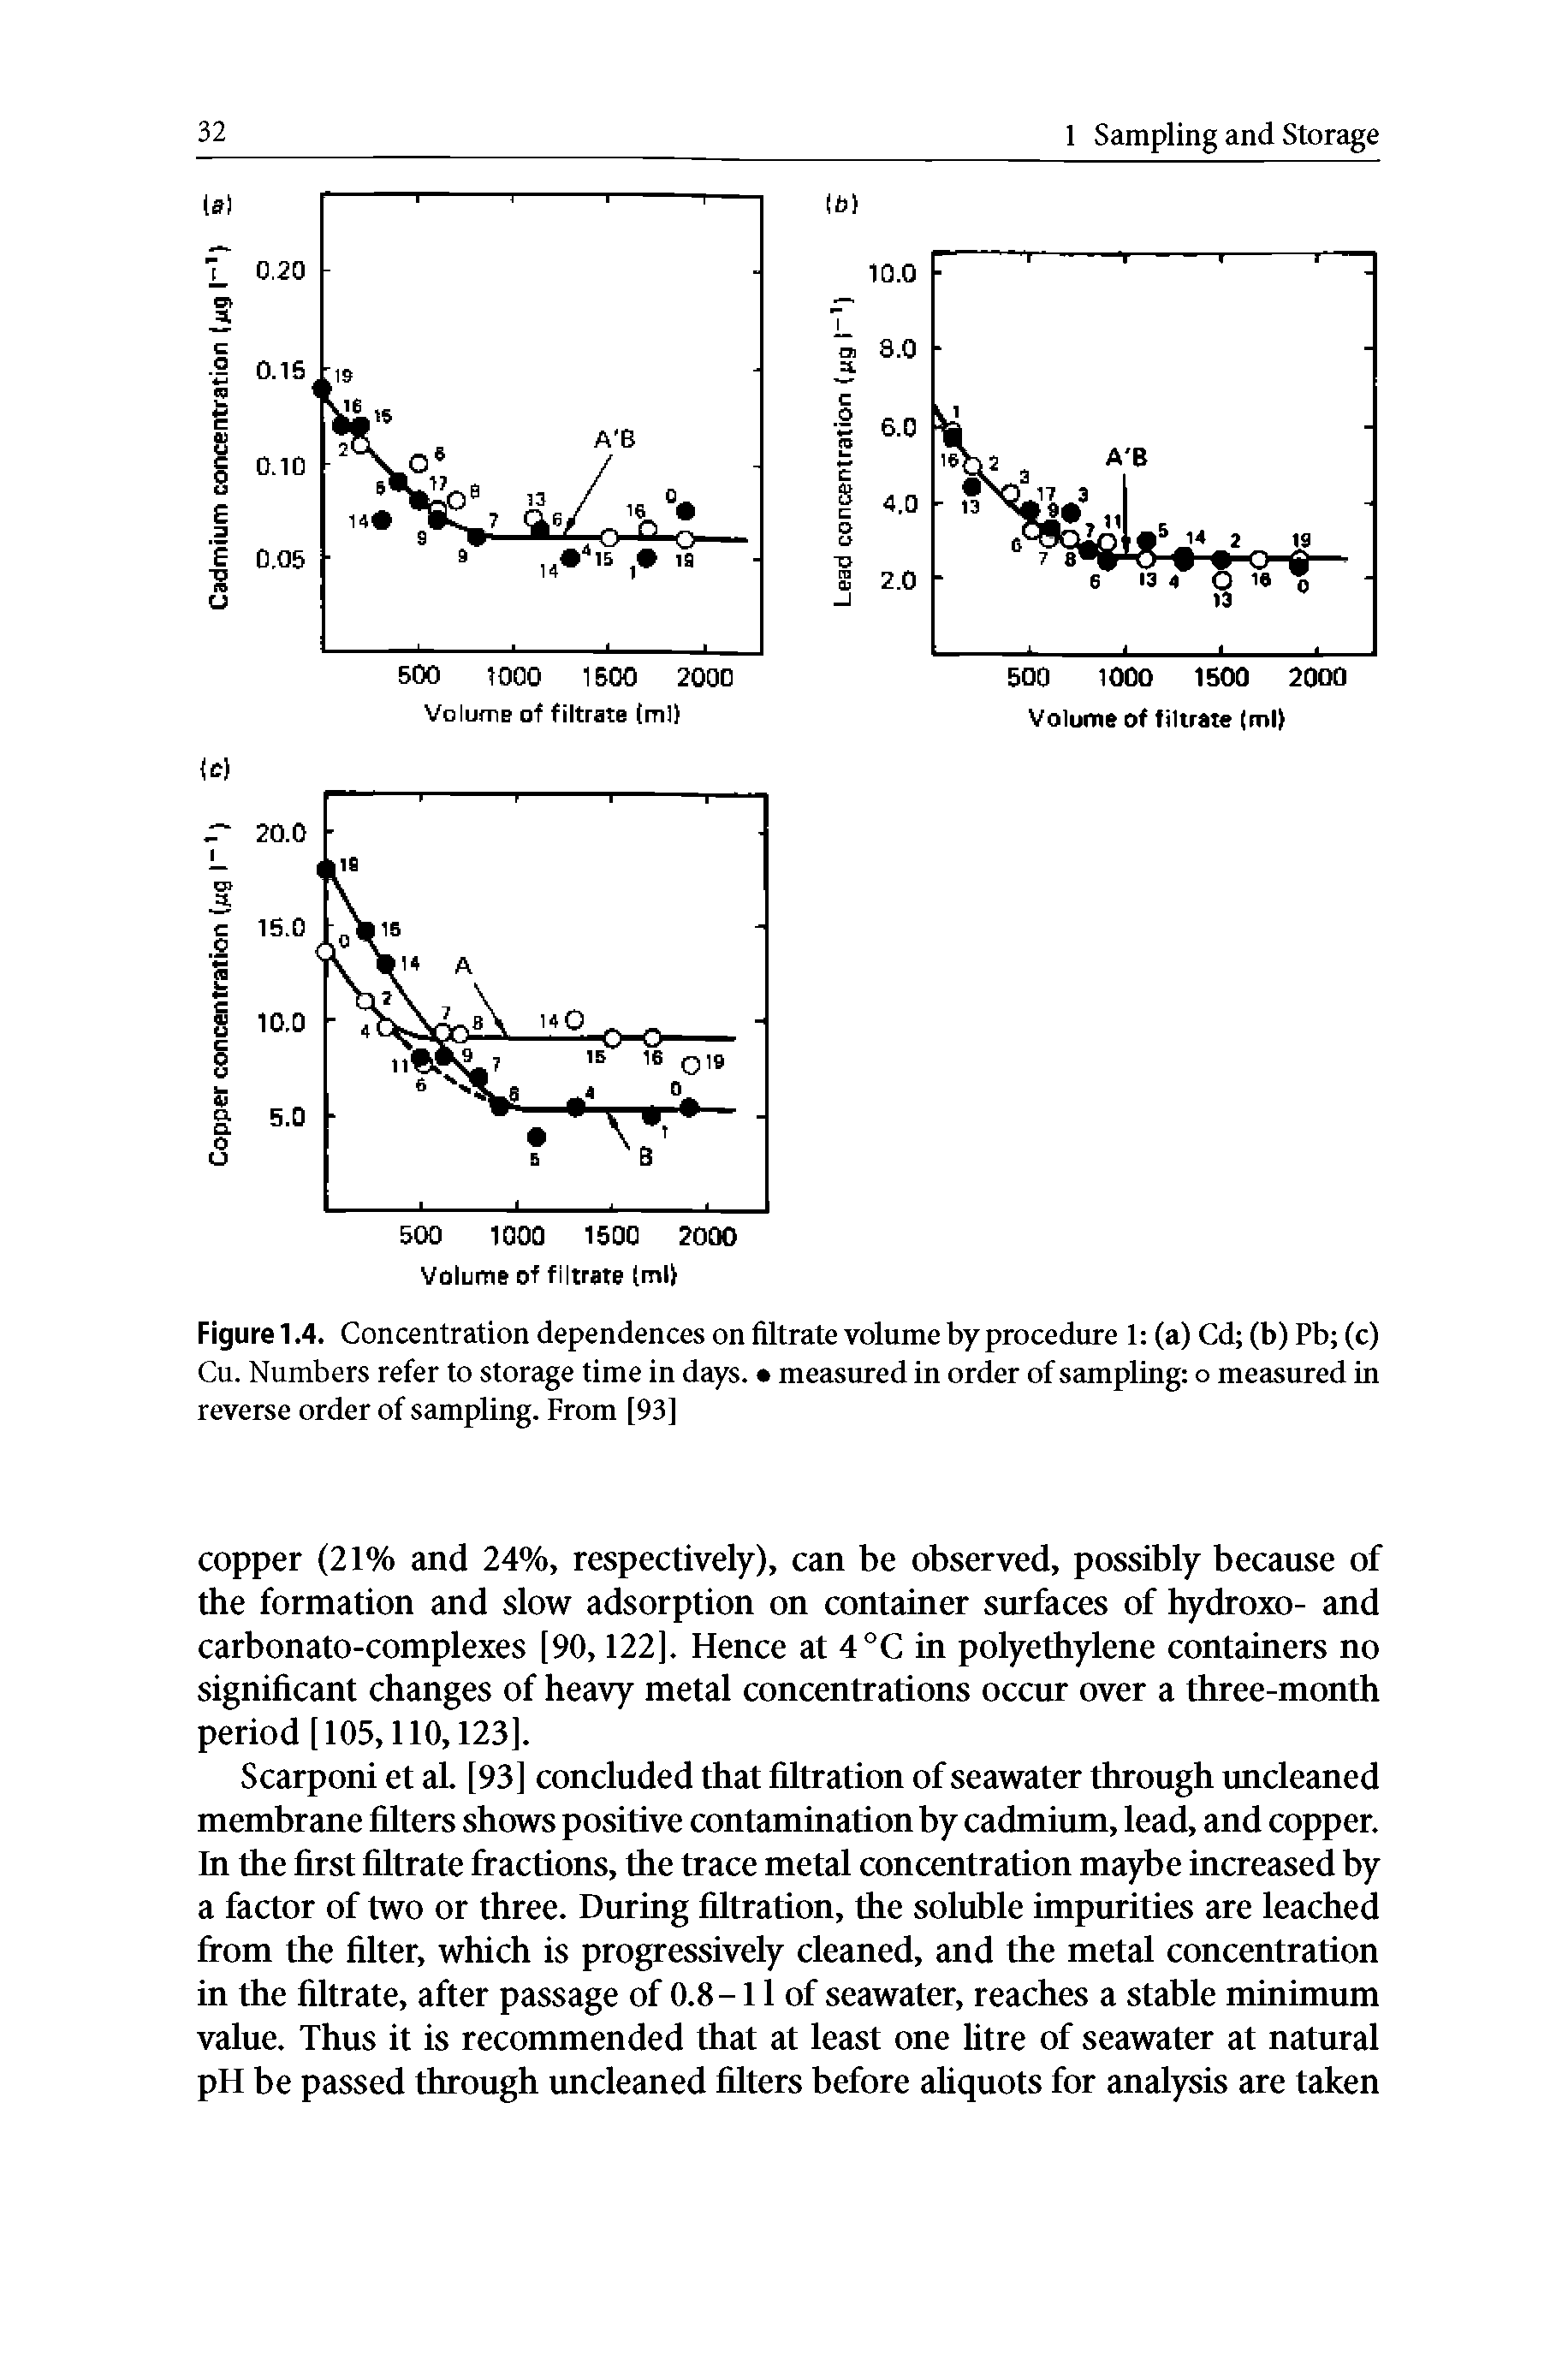 Figure 1.4. Concentration dependences on filtrate volume by procedure 1 (a) Cd (b) Pb (c) Cu. Numbers refer to storage time in days. measured in order of sampling o measured in reverse order of sampling. From [93]...